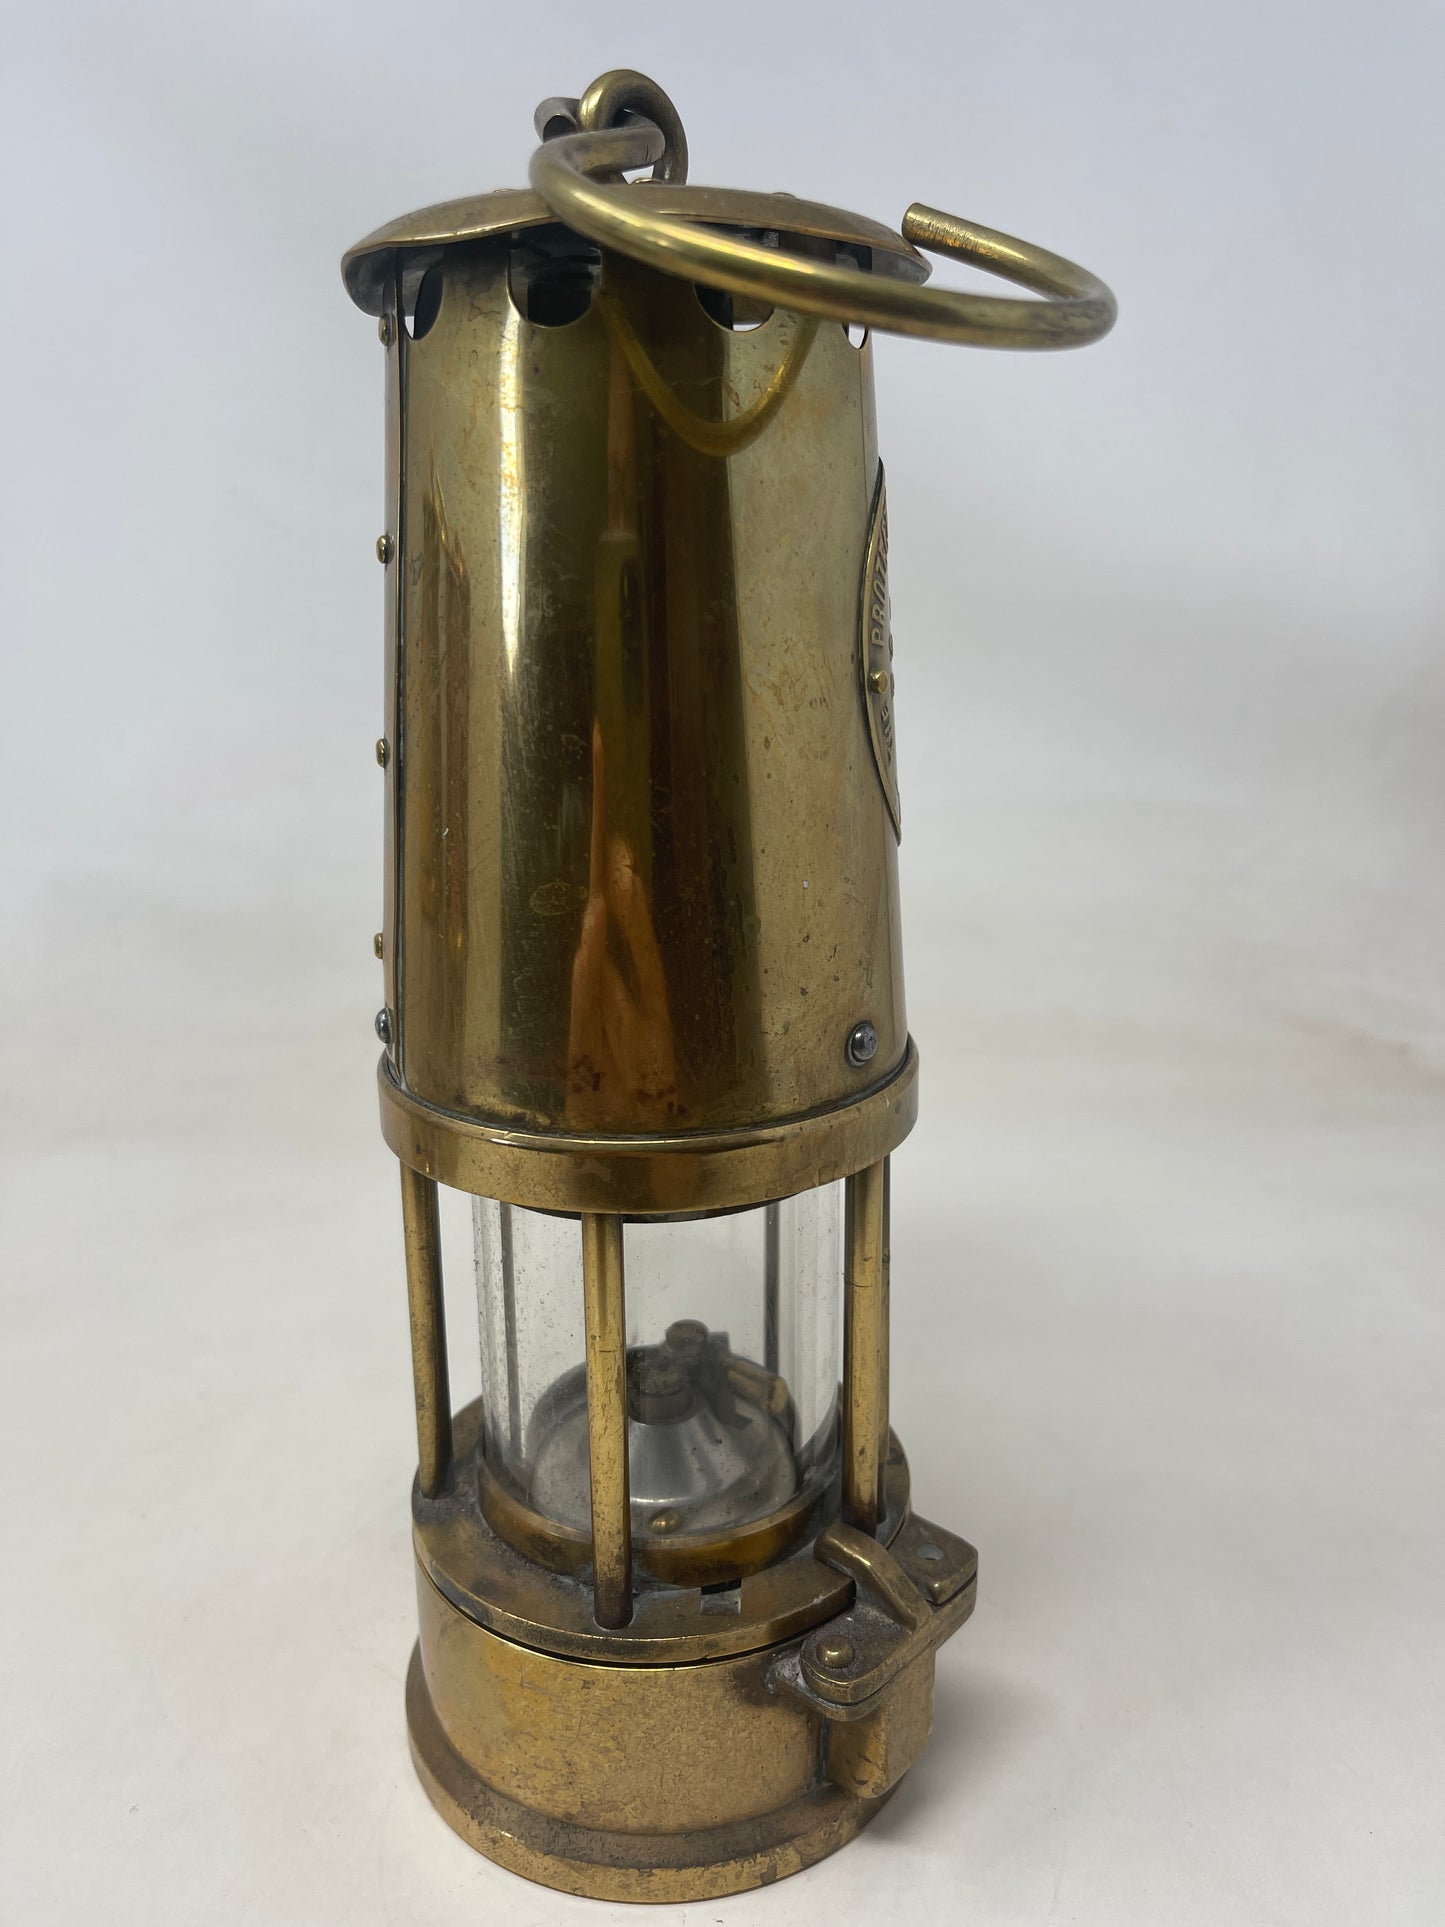 The Eccles Protector Lamp & Lighting Type 6 M & Q Lamps